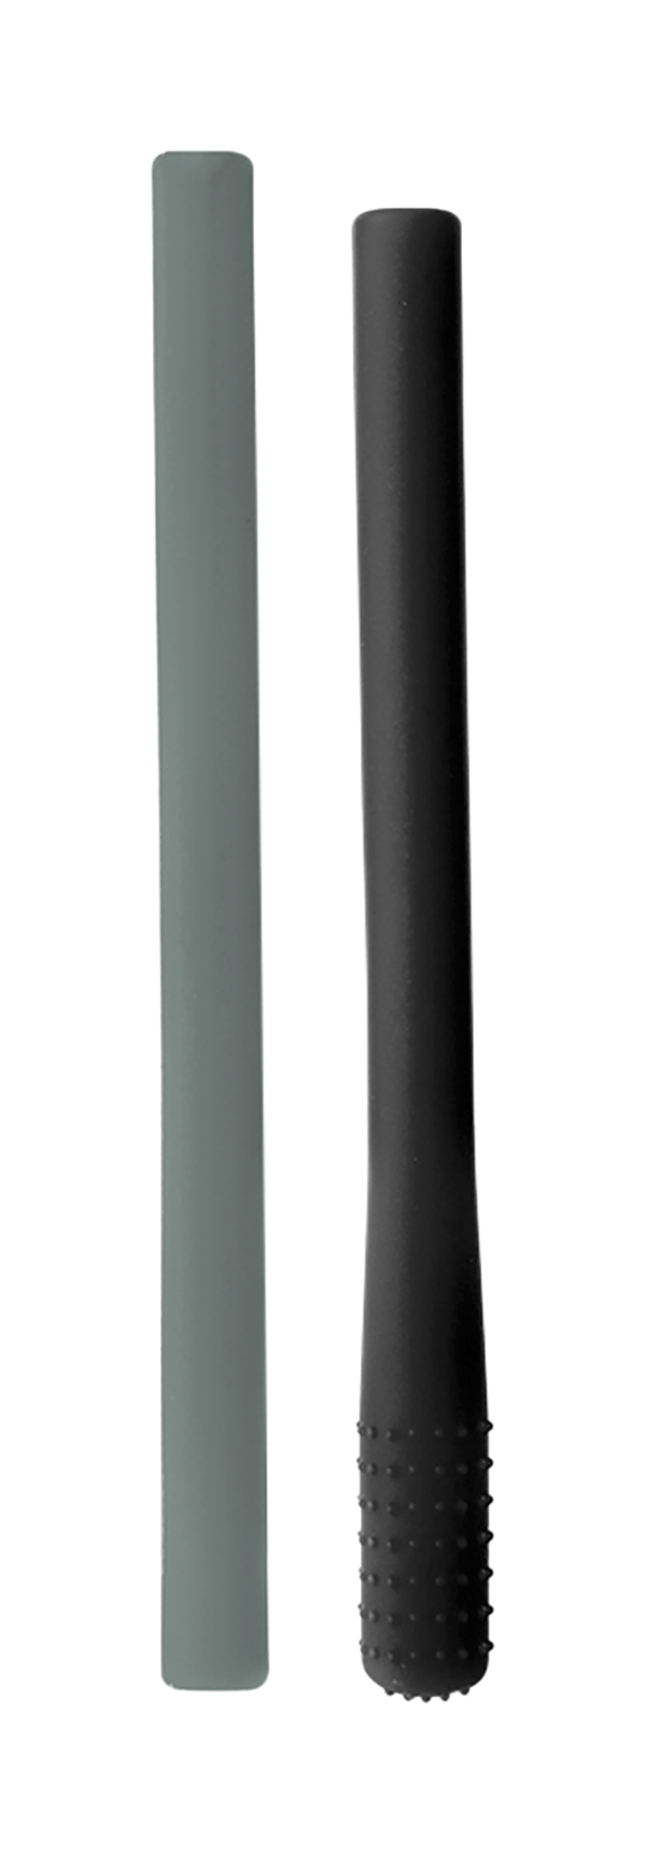 Image for Chewigem Pencil Toppers, Black/Grey from School Specialty